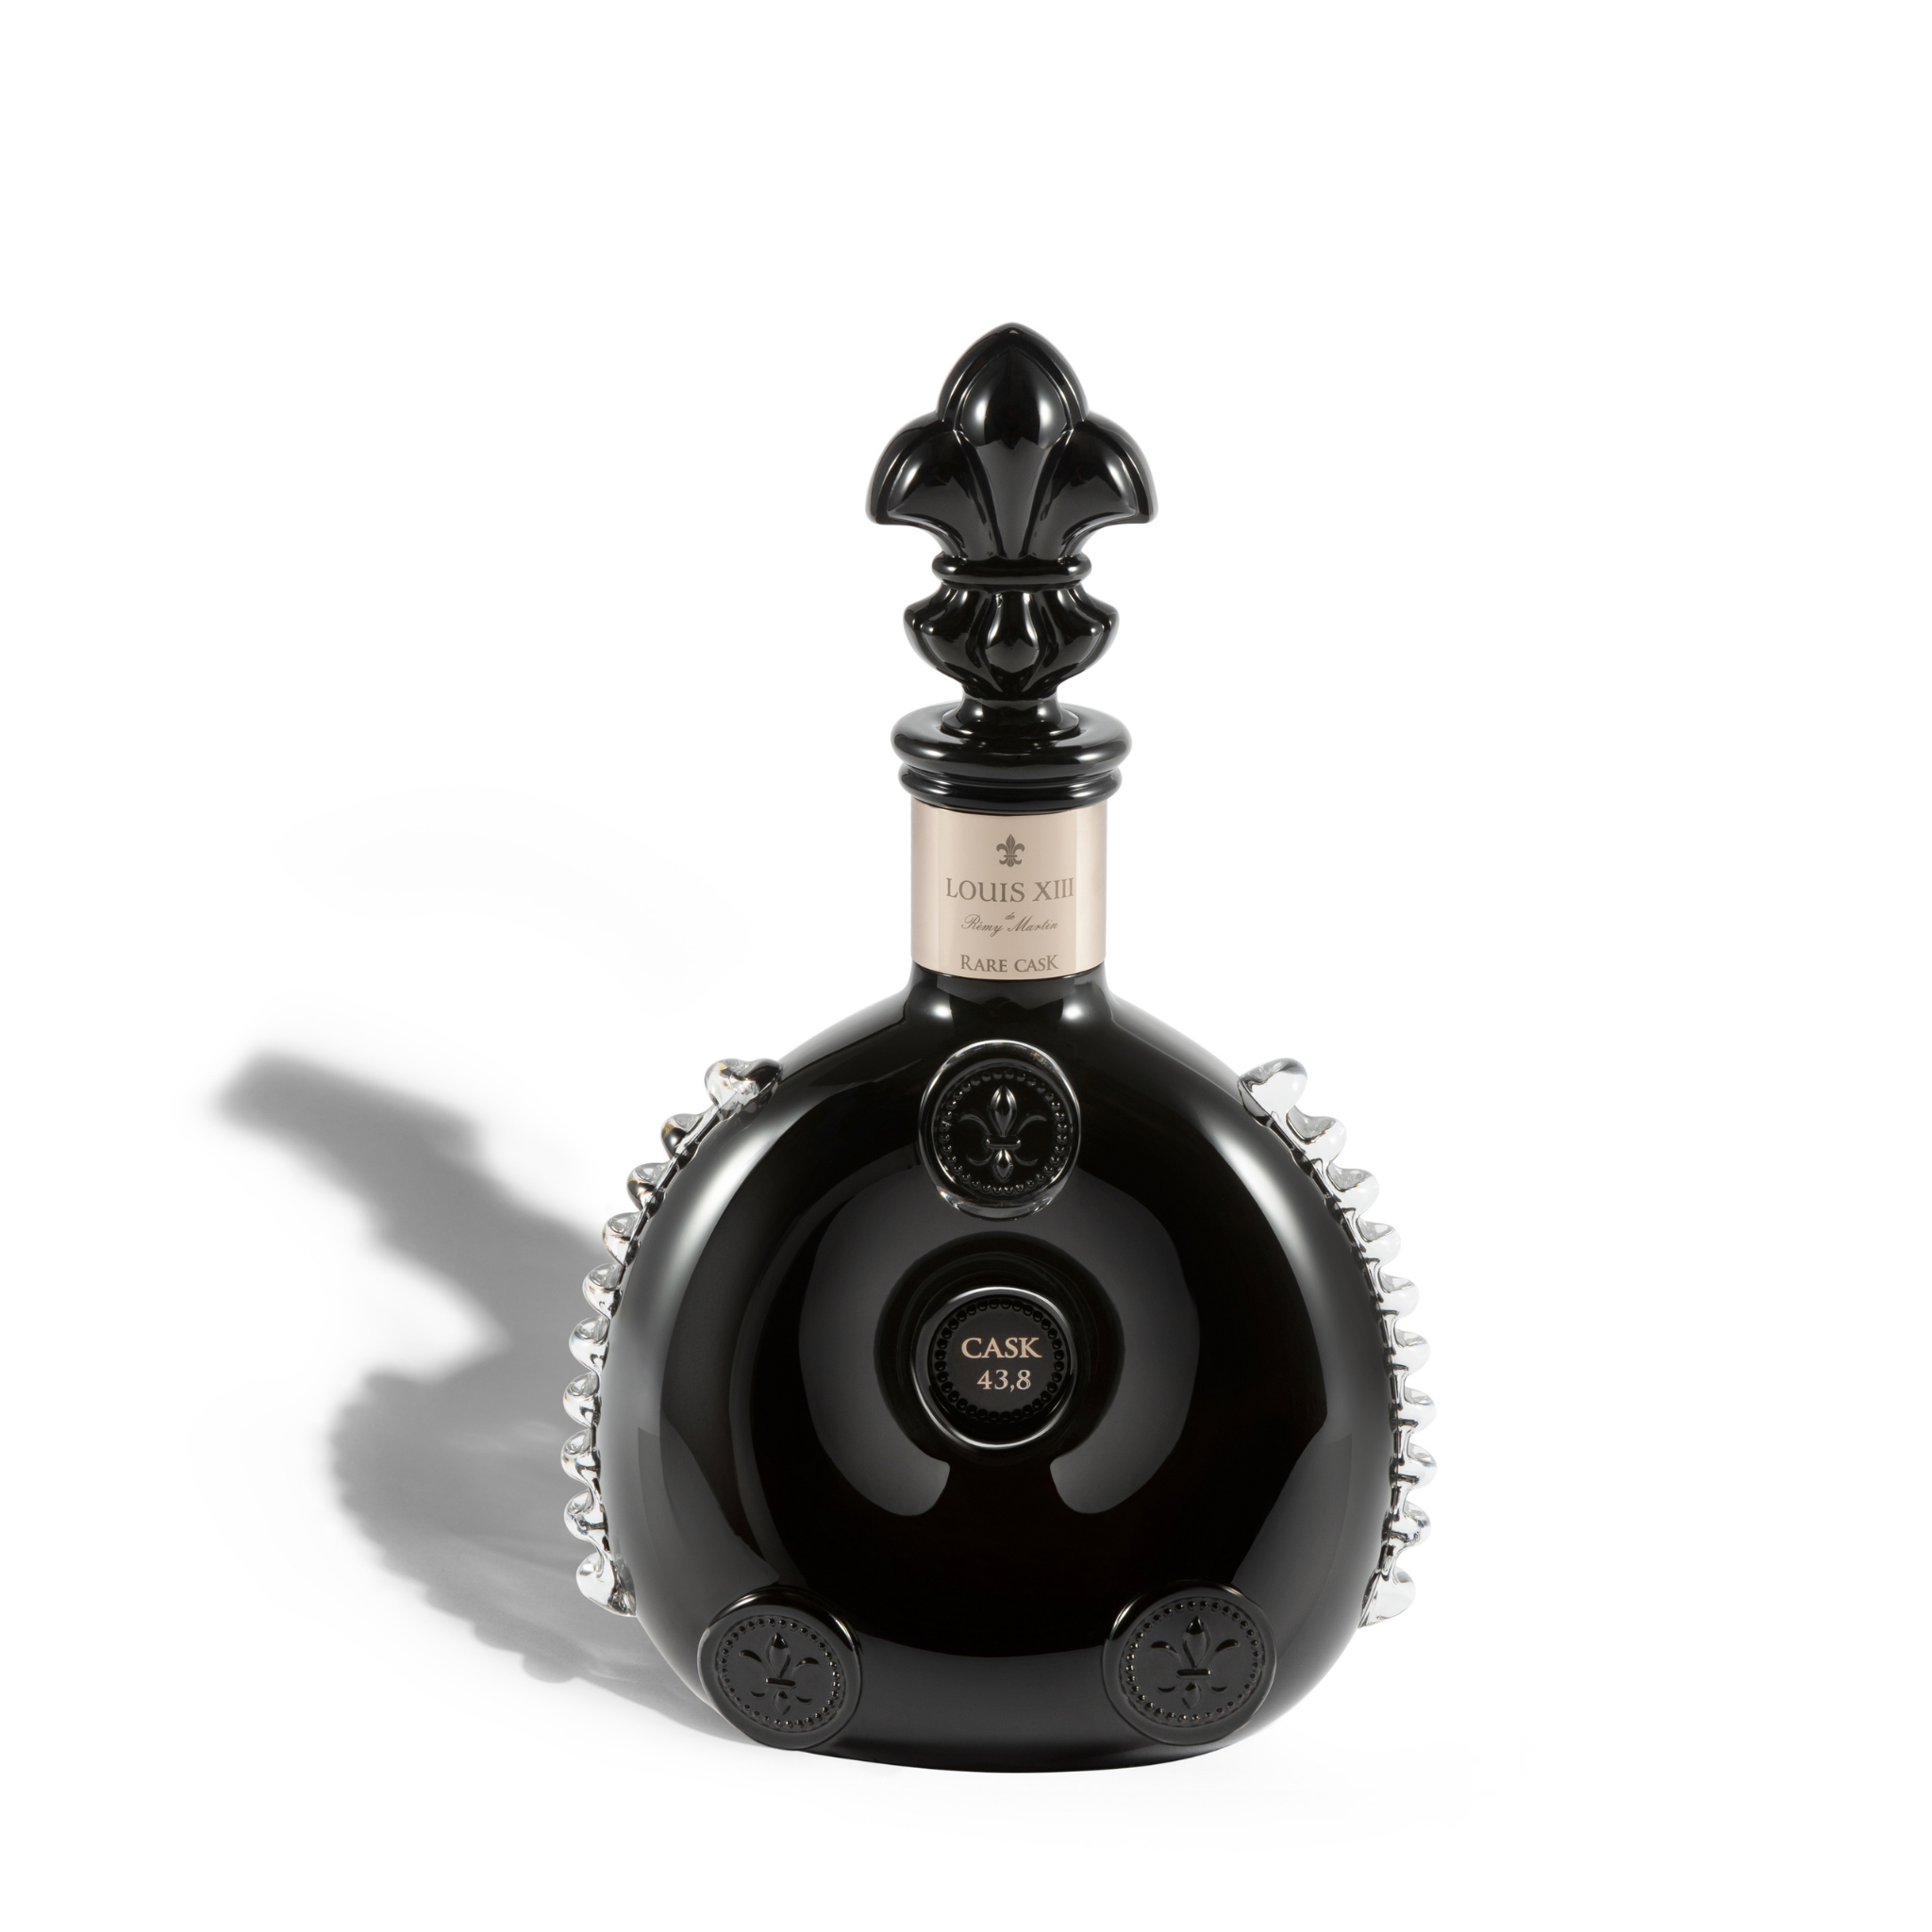 LOUIS XIII Rare Cask 43.8 - Limited Editions - Official Website